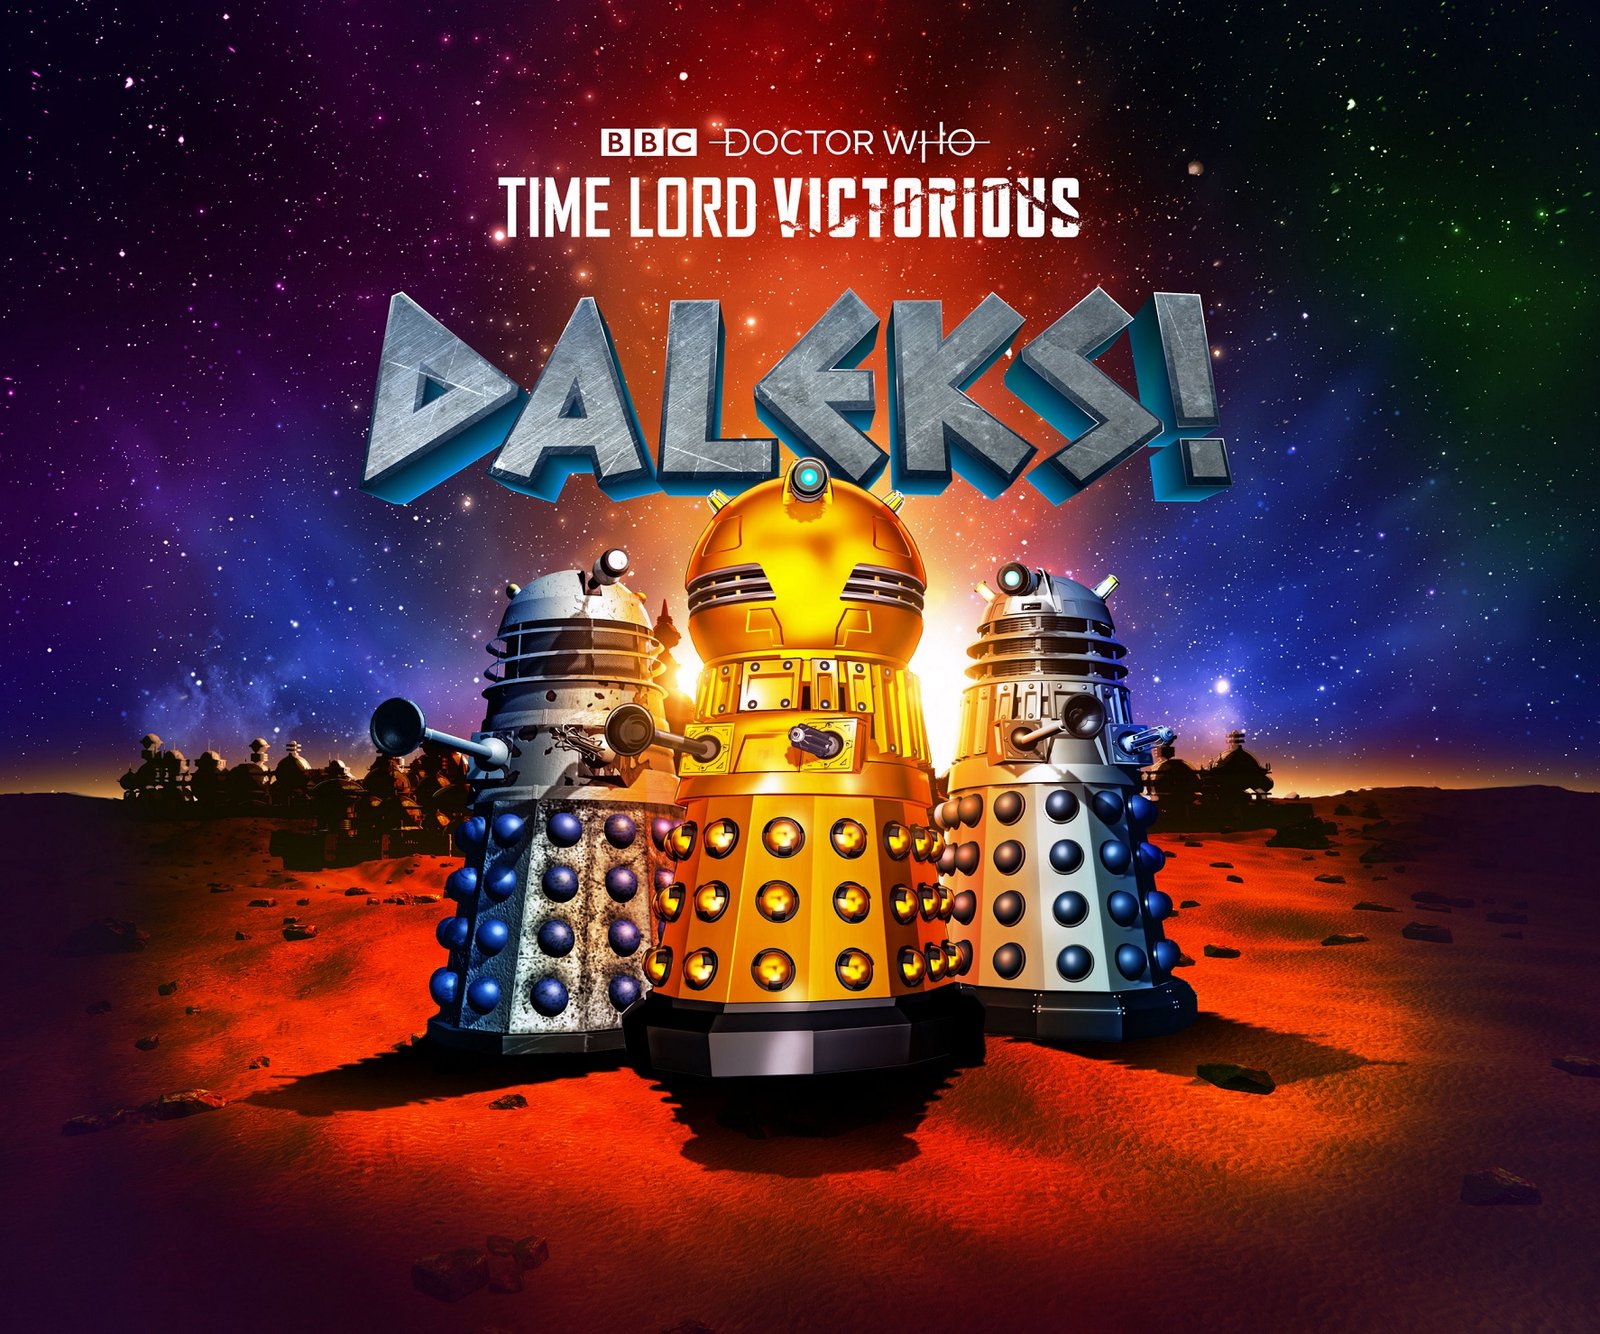 Here’s Our First Look at the New Daleks! Animation, Part of Time Lord Victorious